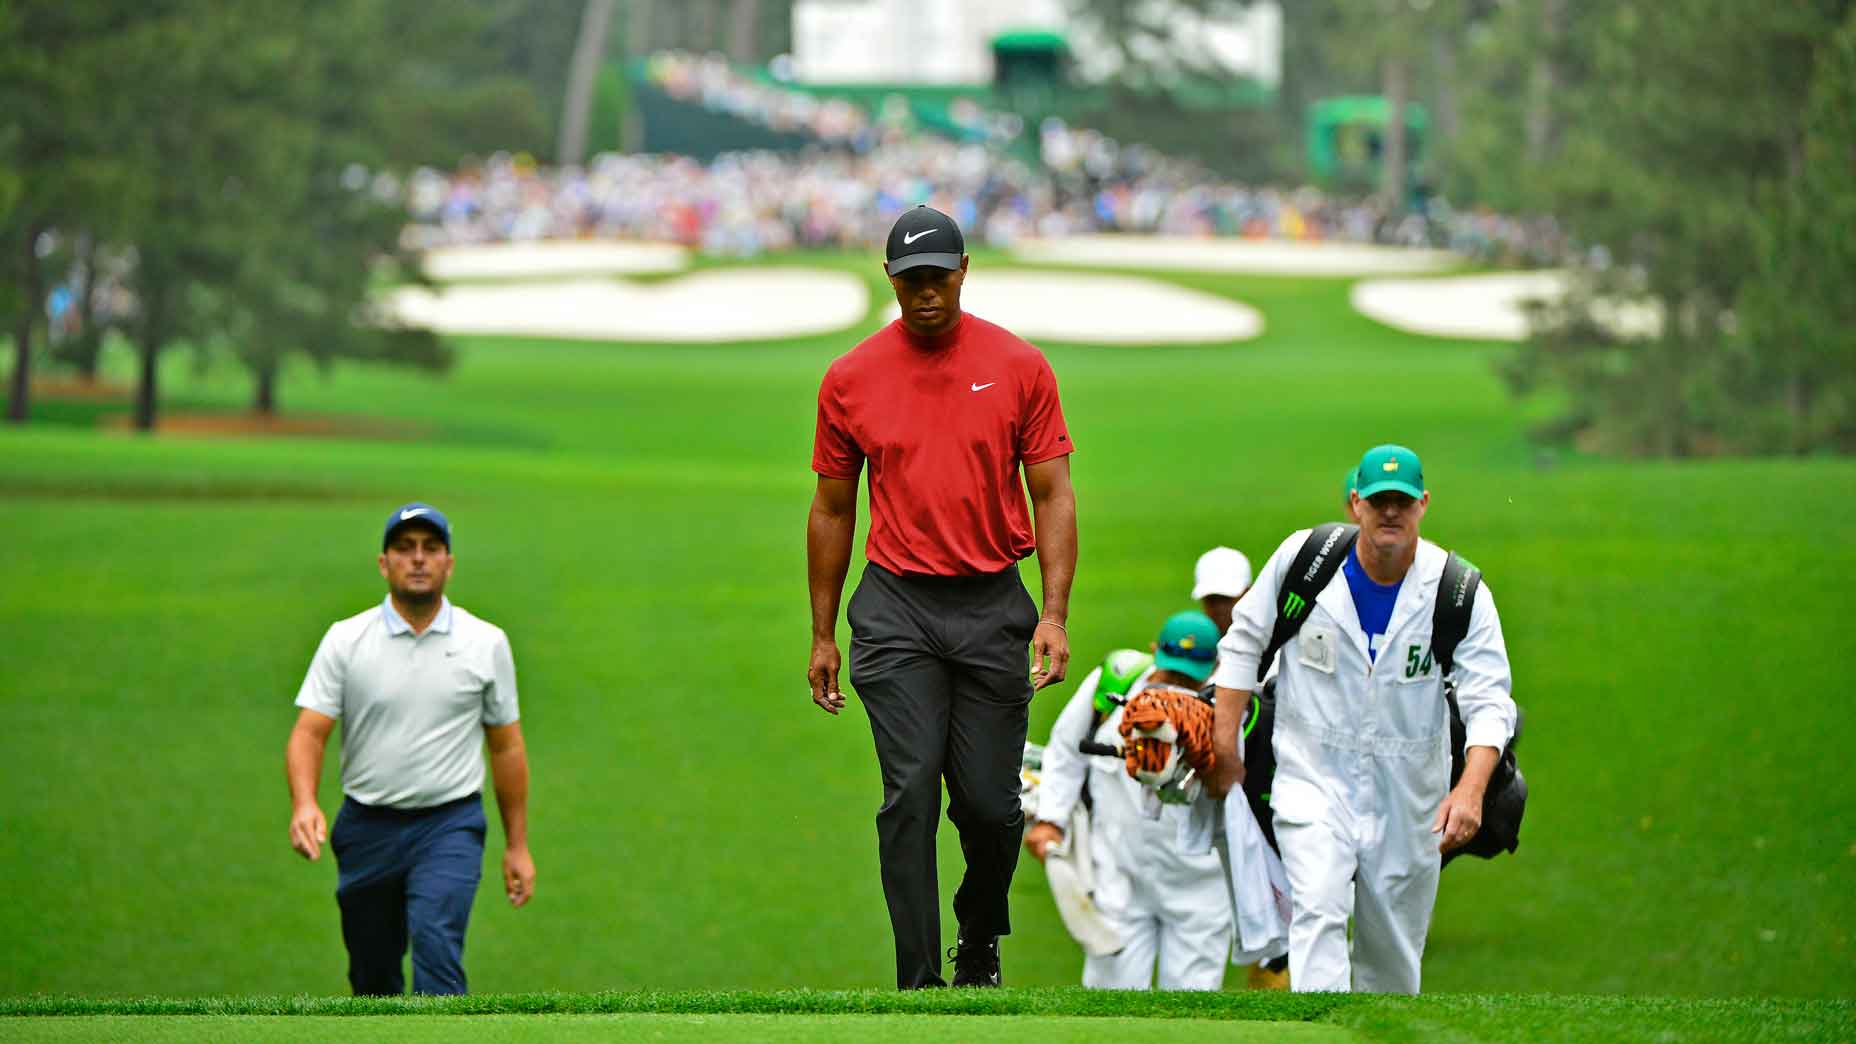 Medalist membership price Here's what it costs to join Tiger Woods' club